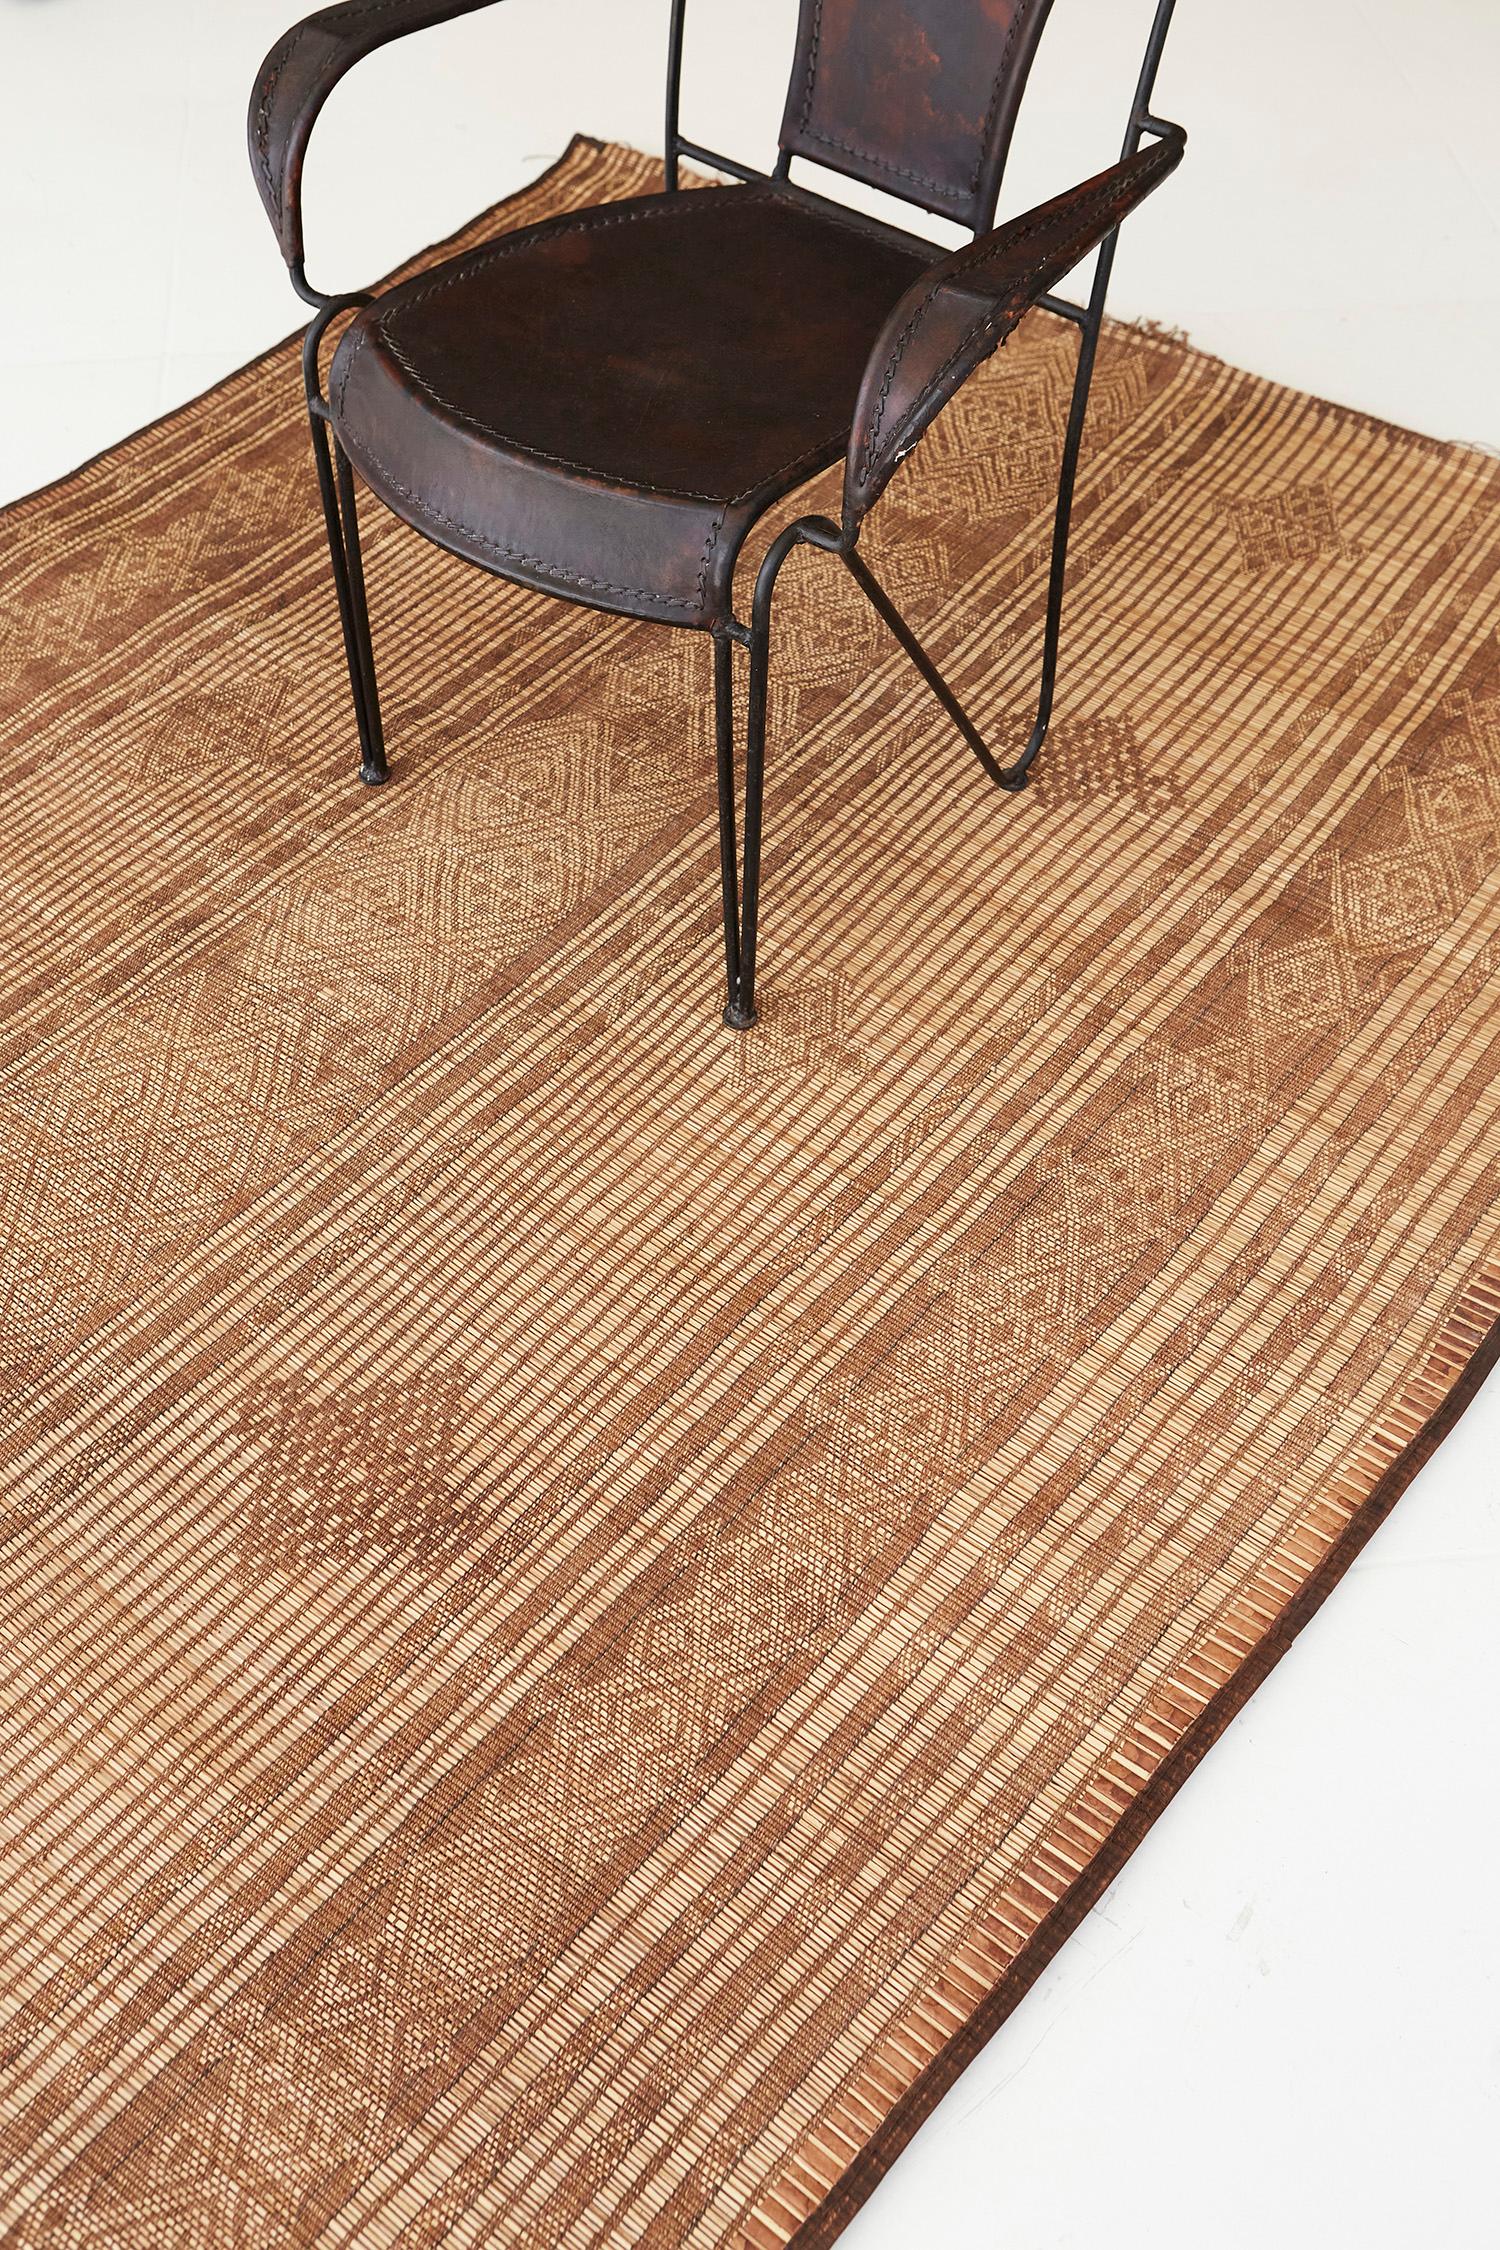 Enrich your room with so much history and sophistication with our Tuareg mat. It highlights the diamond patterns and Berber symbols on its core which these strong details brighten up the mood. Known for their durability, these are made from reed and